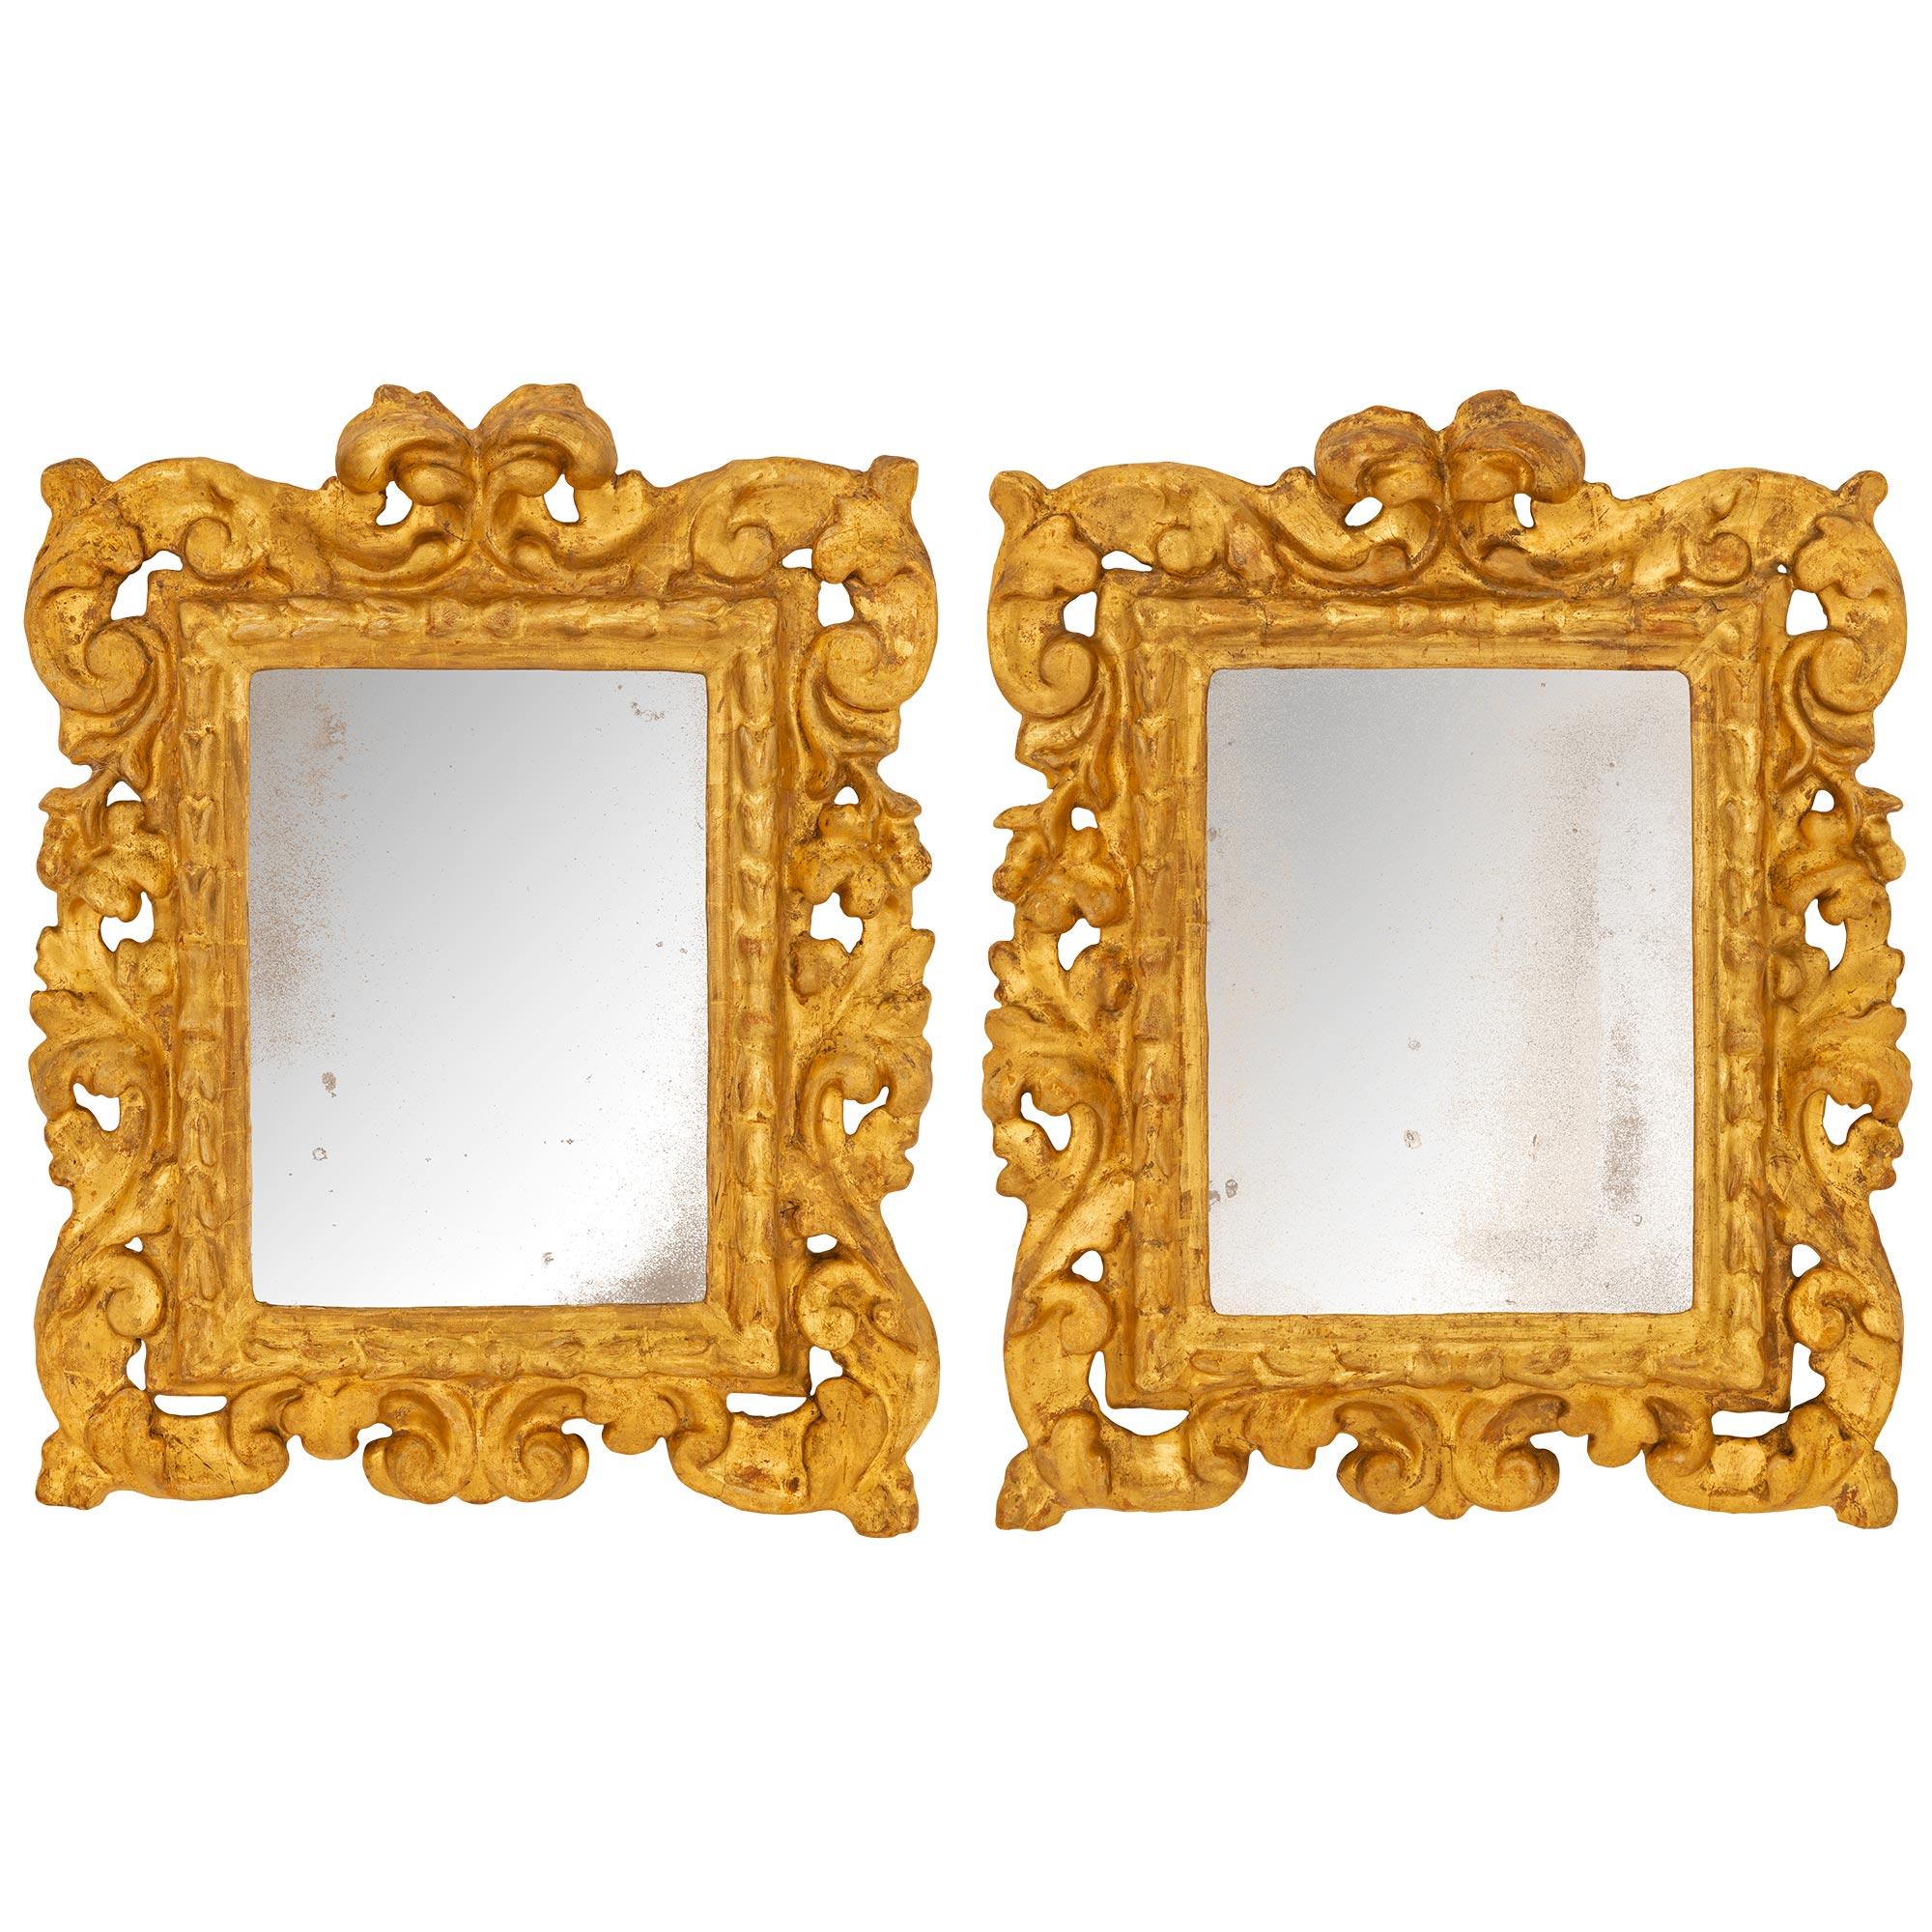 A charming and most decorative pair of Italian early 18th century Baroque period giltwood mirrors. Each mirror retains its original mirror plates set within an elegant straight mottled border. The beautiful frames display most decorative elaborate